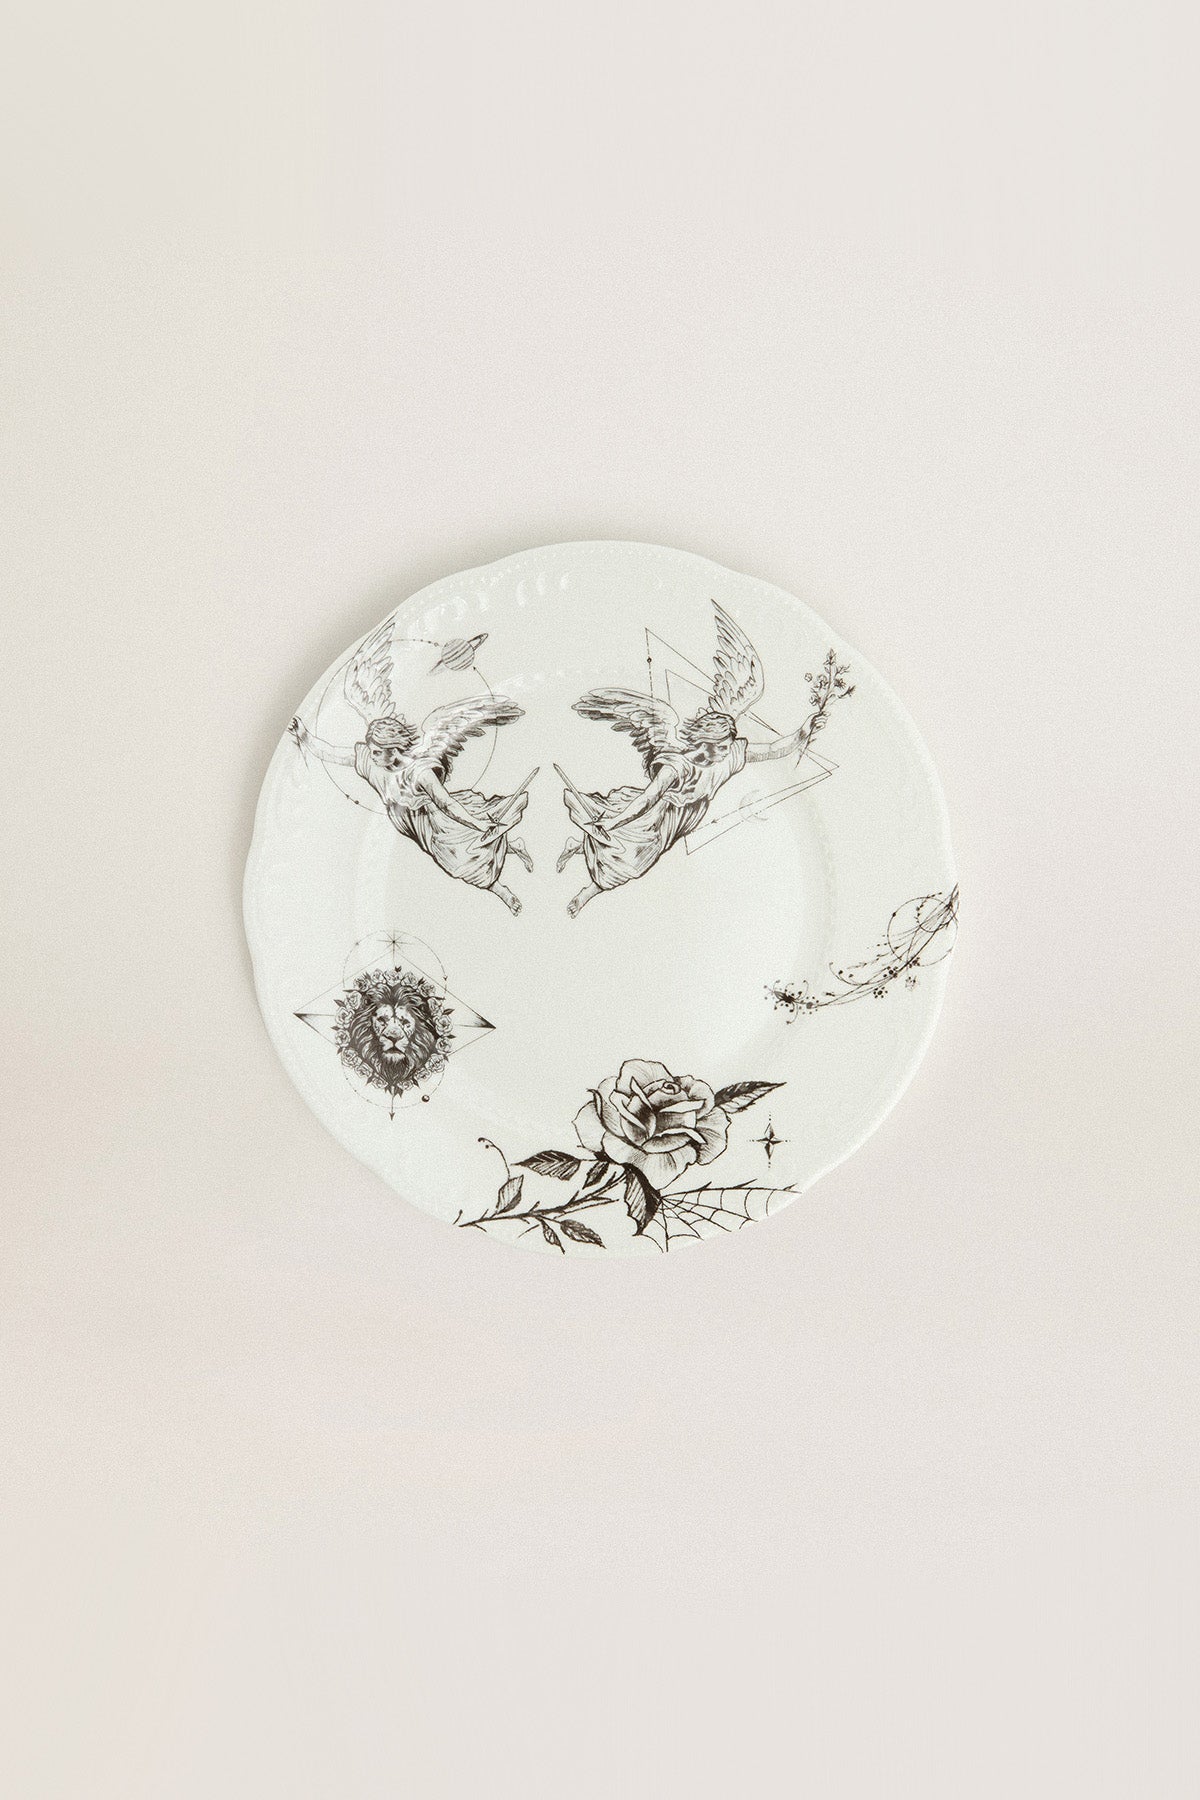 GOLDEN GOOSE HAUS - DREAMED BY DR. WOO | DECORATIVE PLATE – MAXFIELD LA